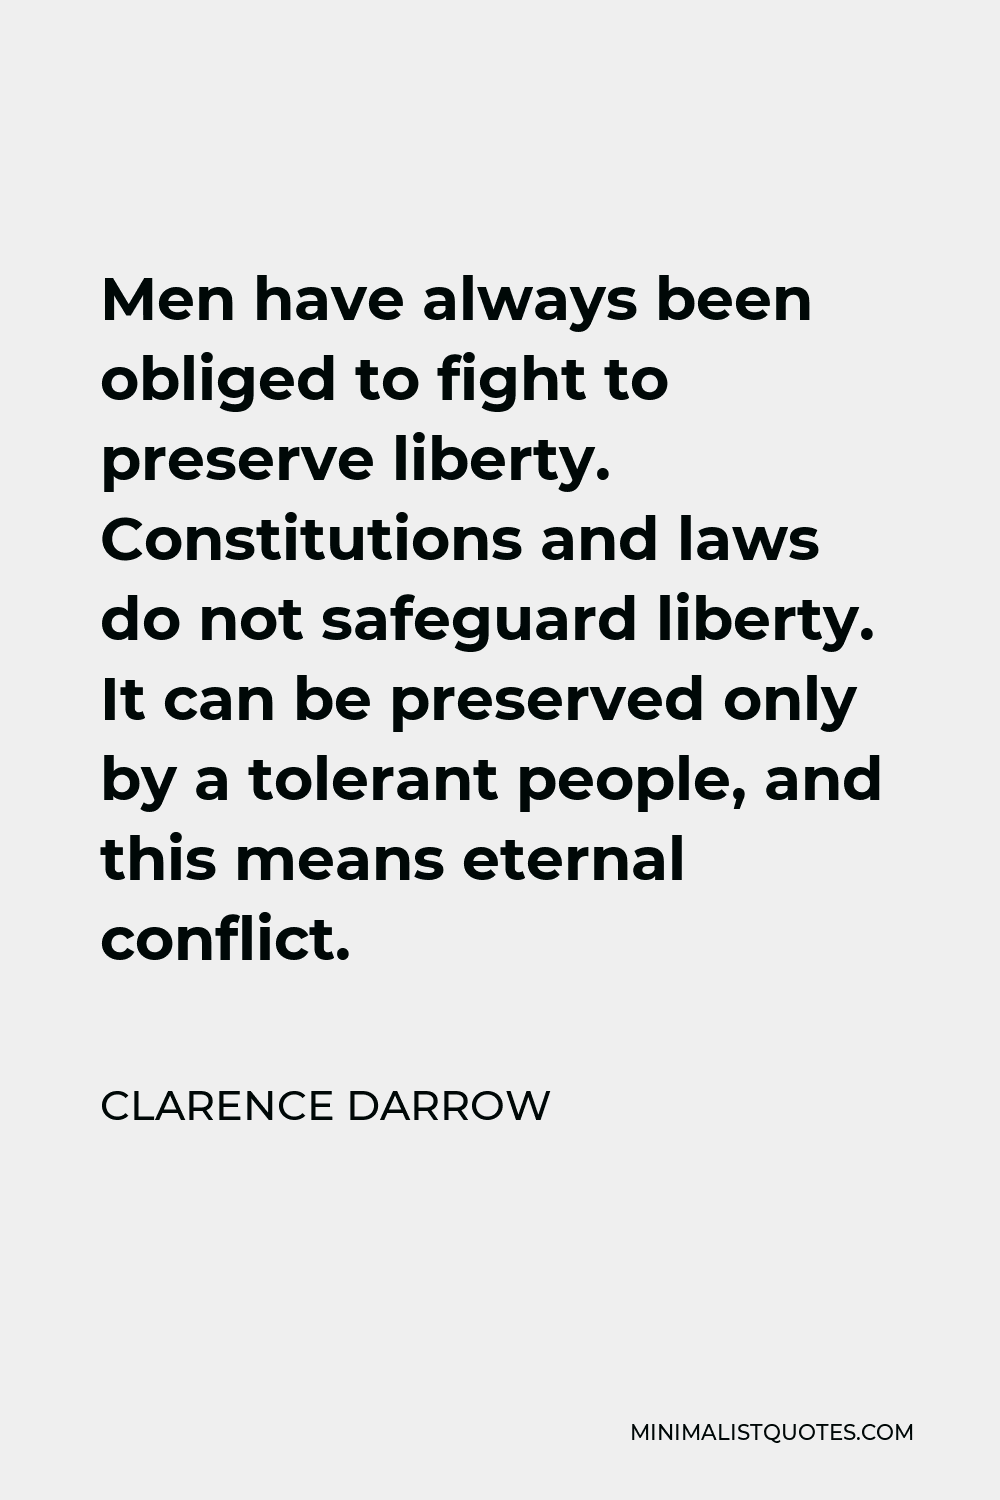 Clarence Darrow Quote - Men have always been obliged to fight to preserve liberty. Constitutions and laws do not safeguard liberty. It can be preserved only by a tolerant people, and this means eternal conflict.